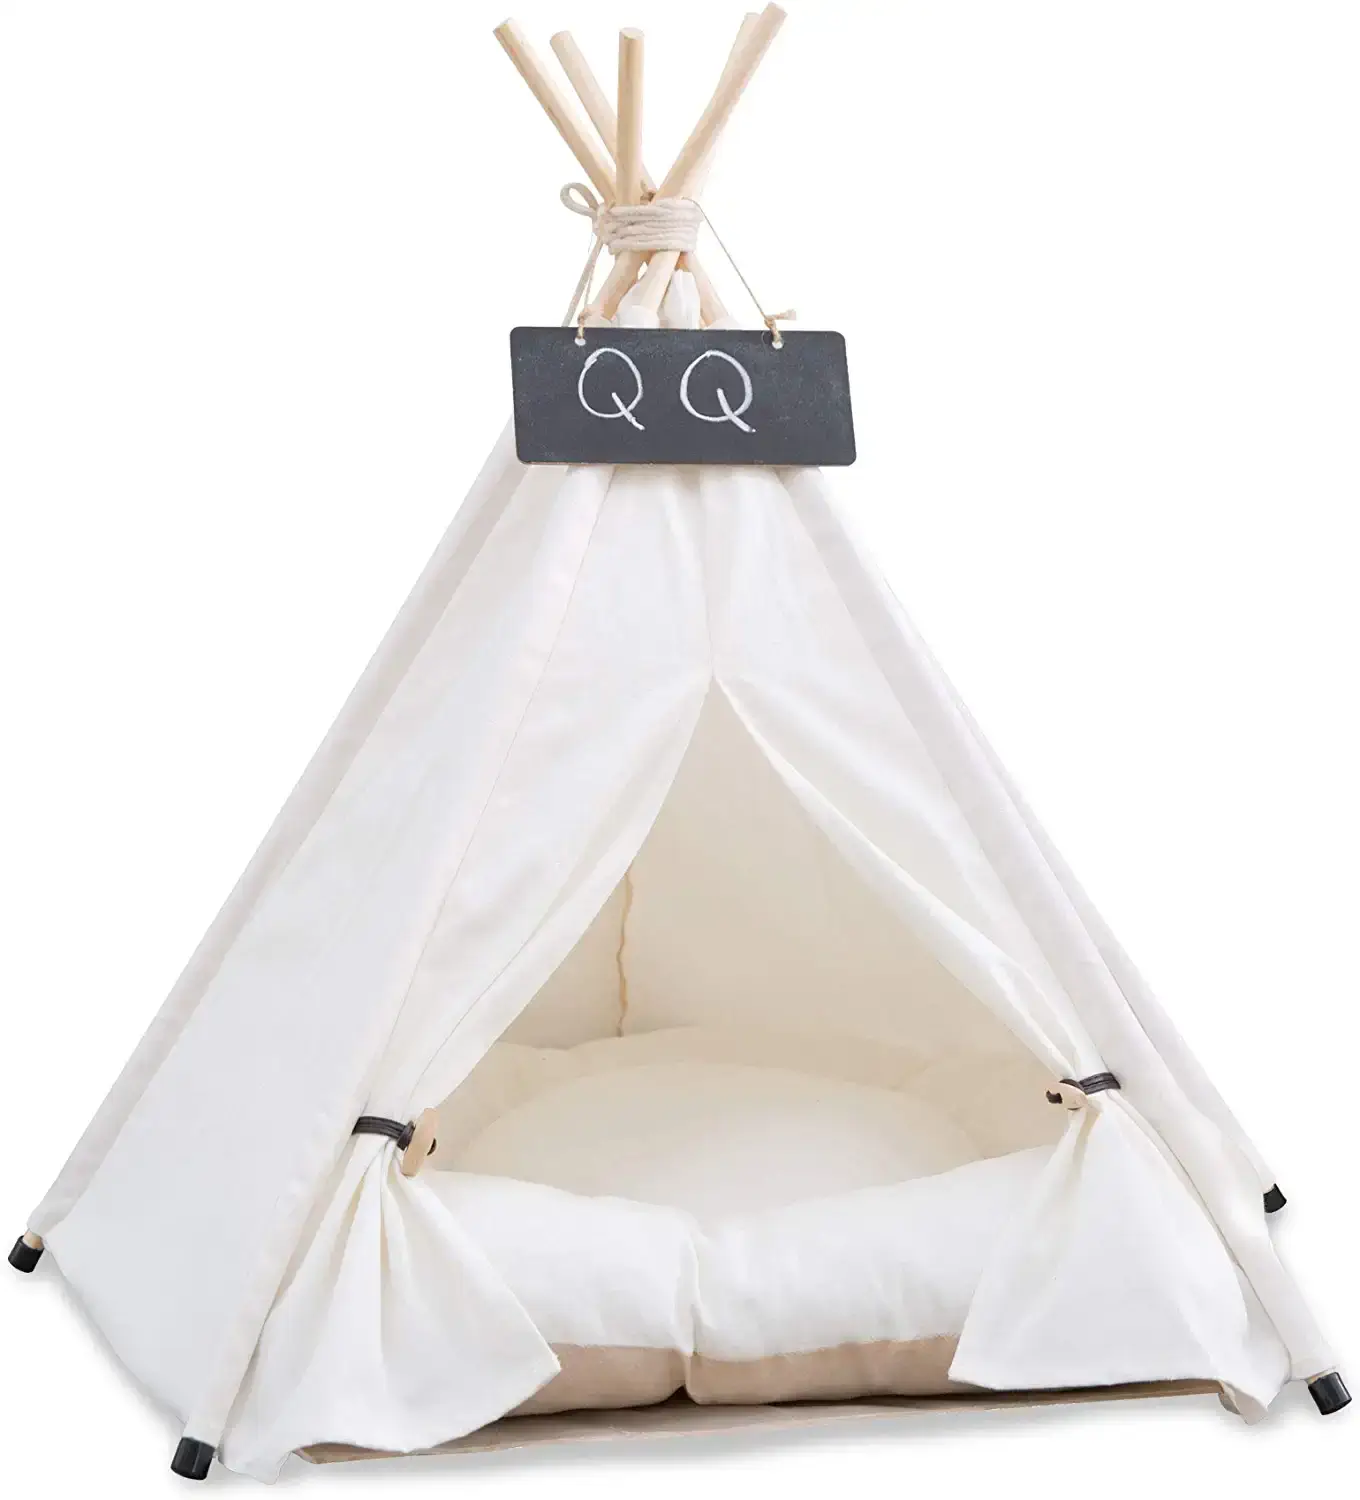 Pet Teepee with Cushion for Dogs and Puppies